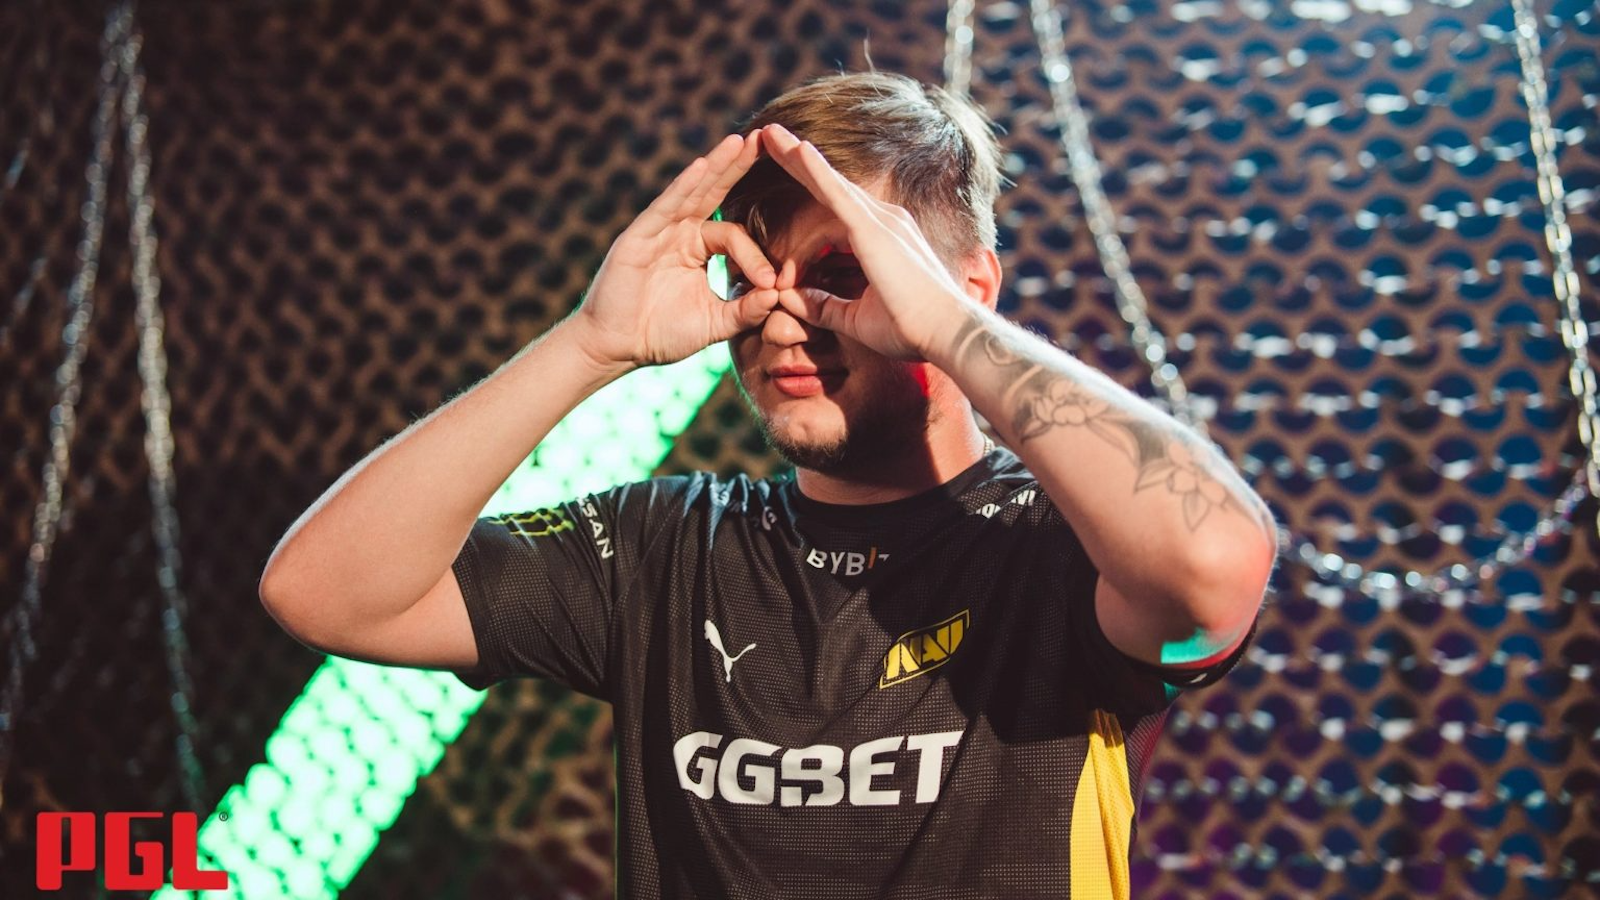 ‘Tomorrow all your lies will come out’: S1mple claps back in messy hotel debacle